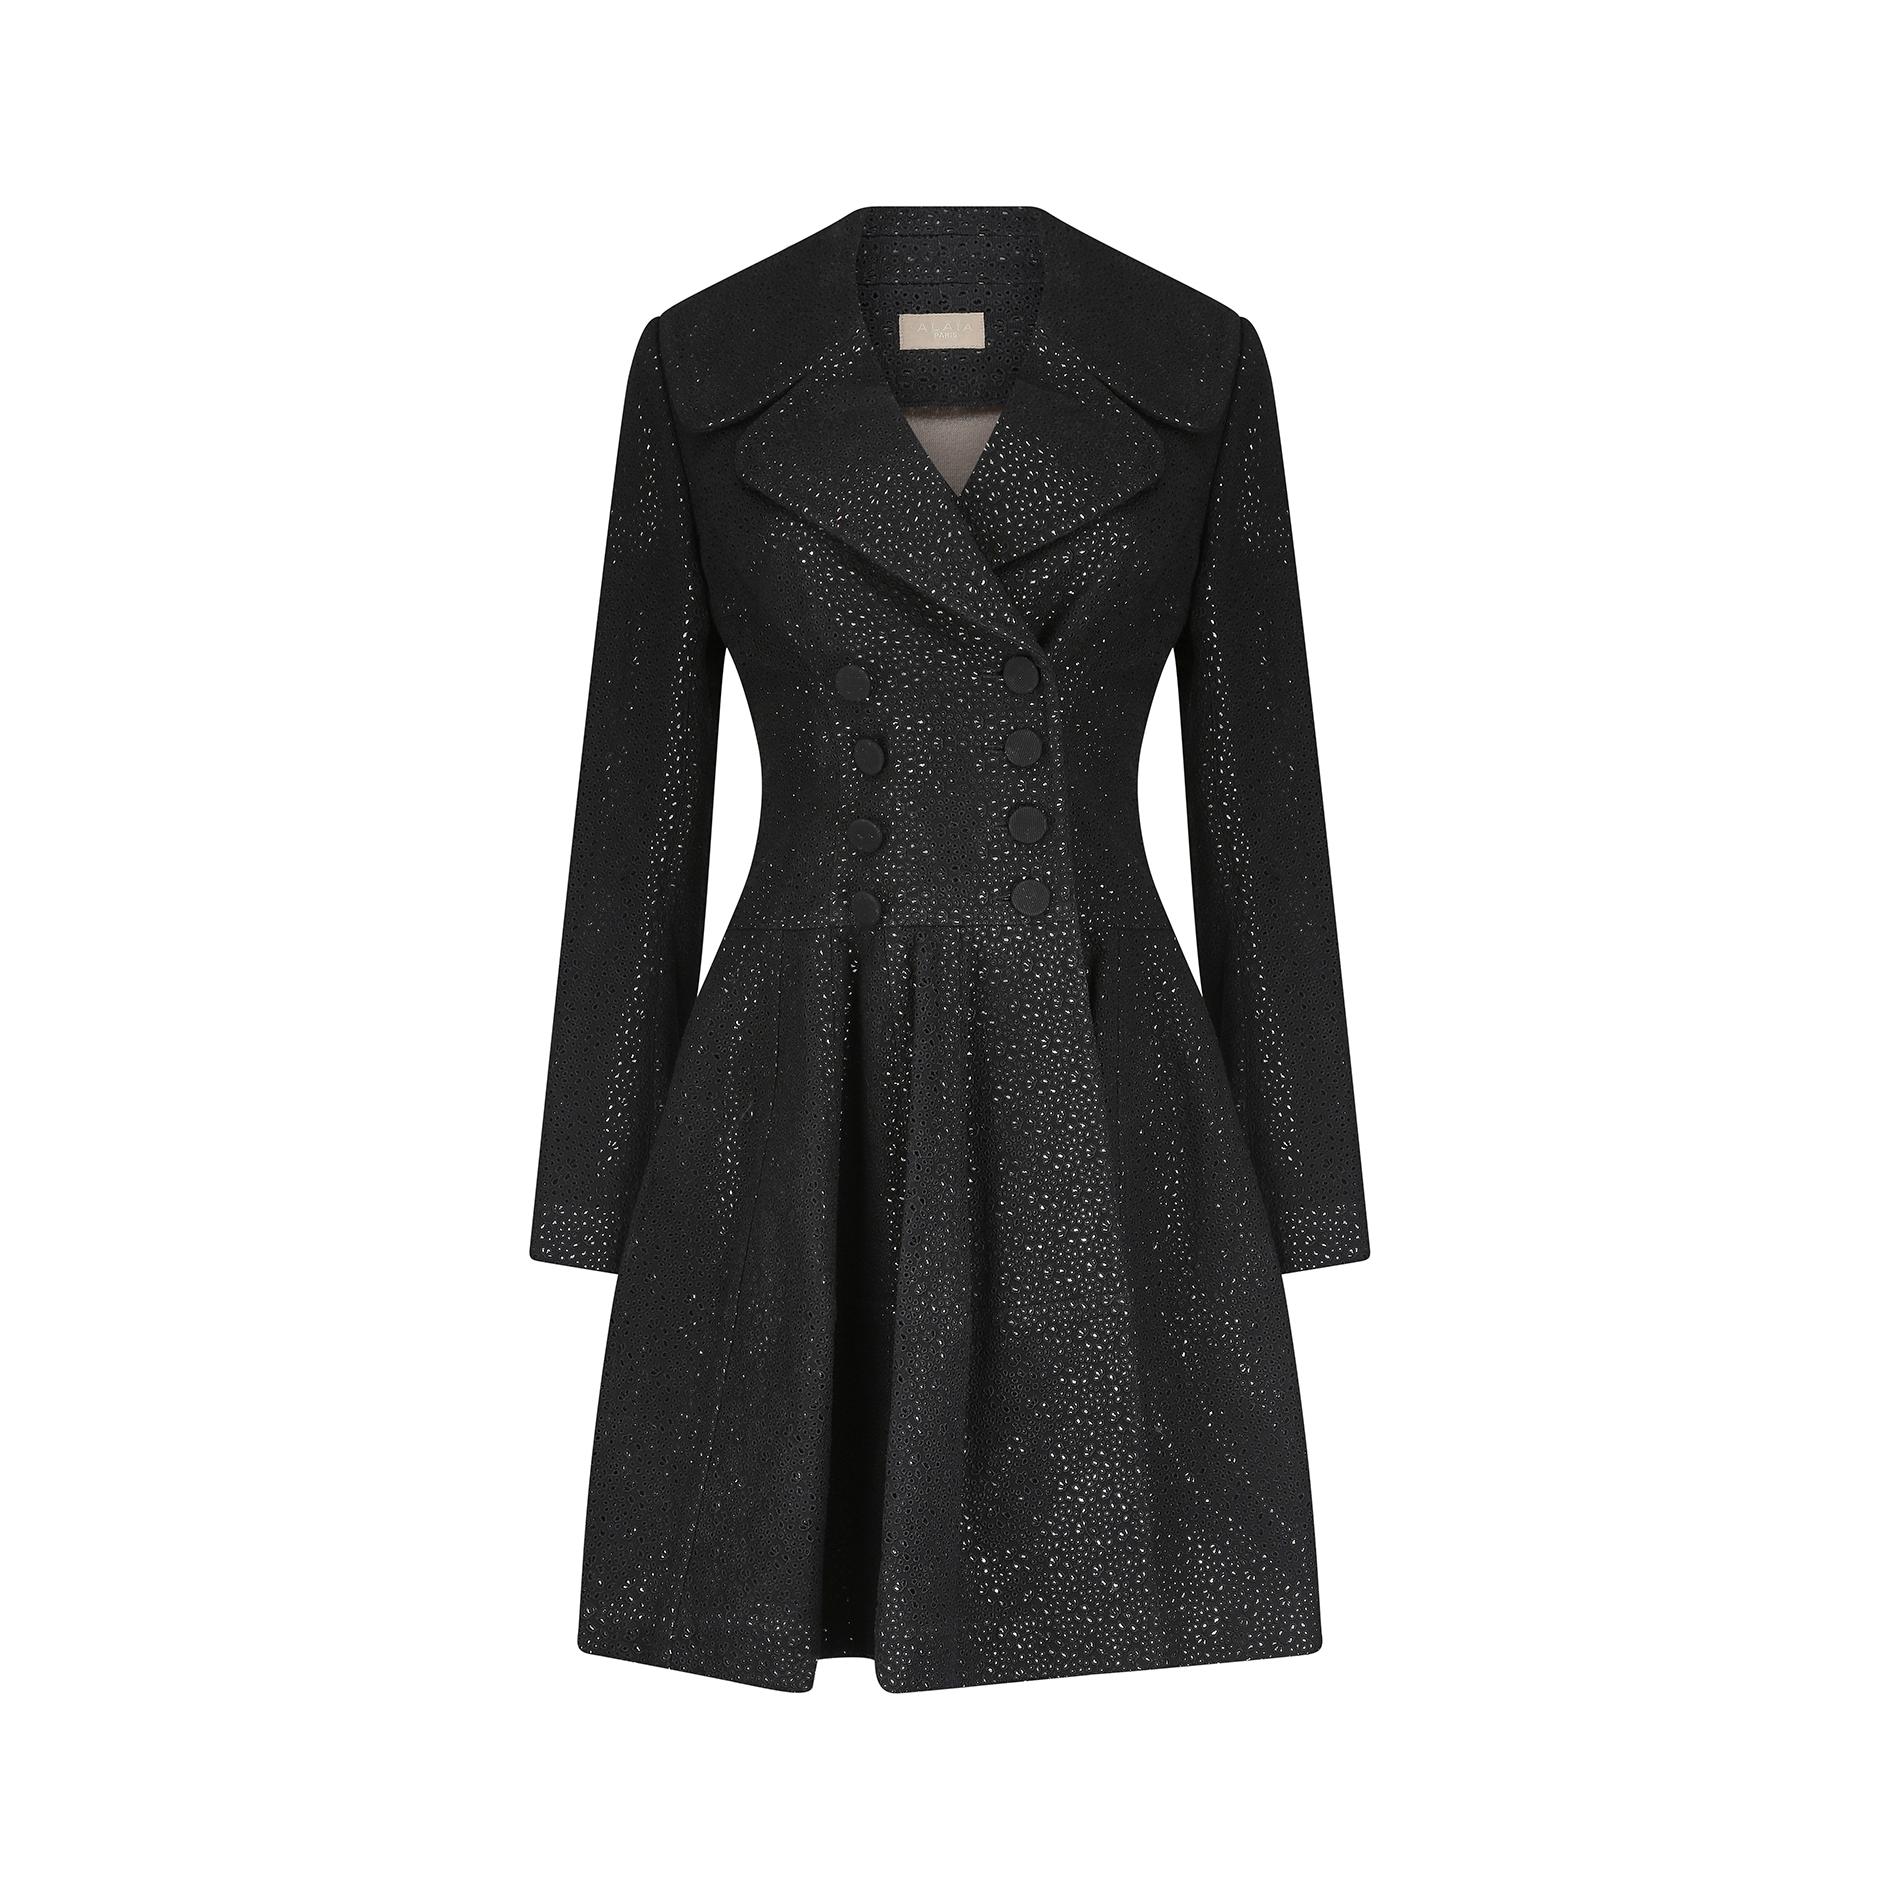 This fabulous early 2010s Alaia coat is cut in a classic princess shape, which creates a flattering, feminine silhouette. The fabric is comprised of a thick black garbardine cotton blend with a fine floral embroidered eyelet cut out design allover. 